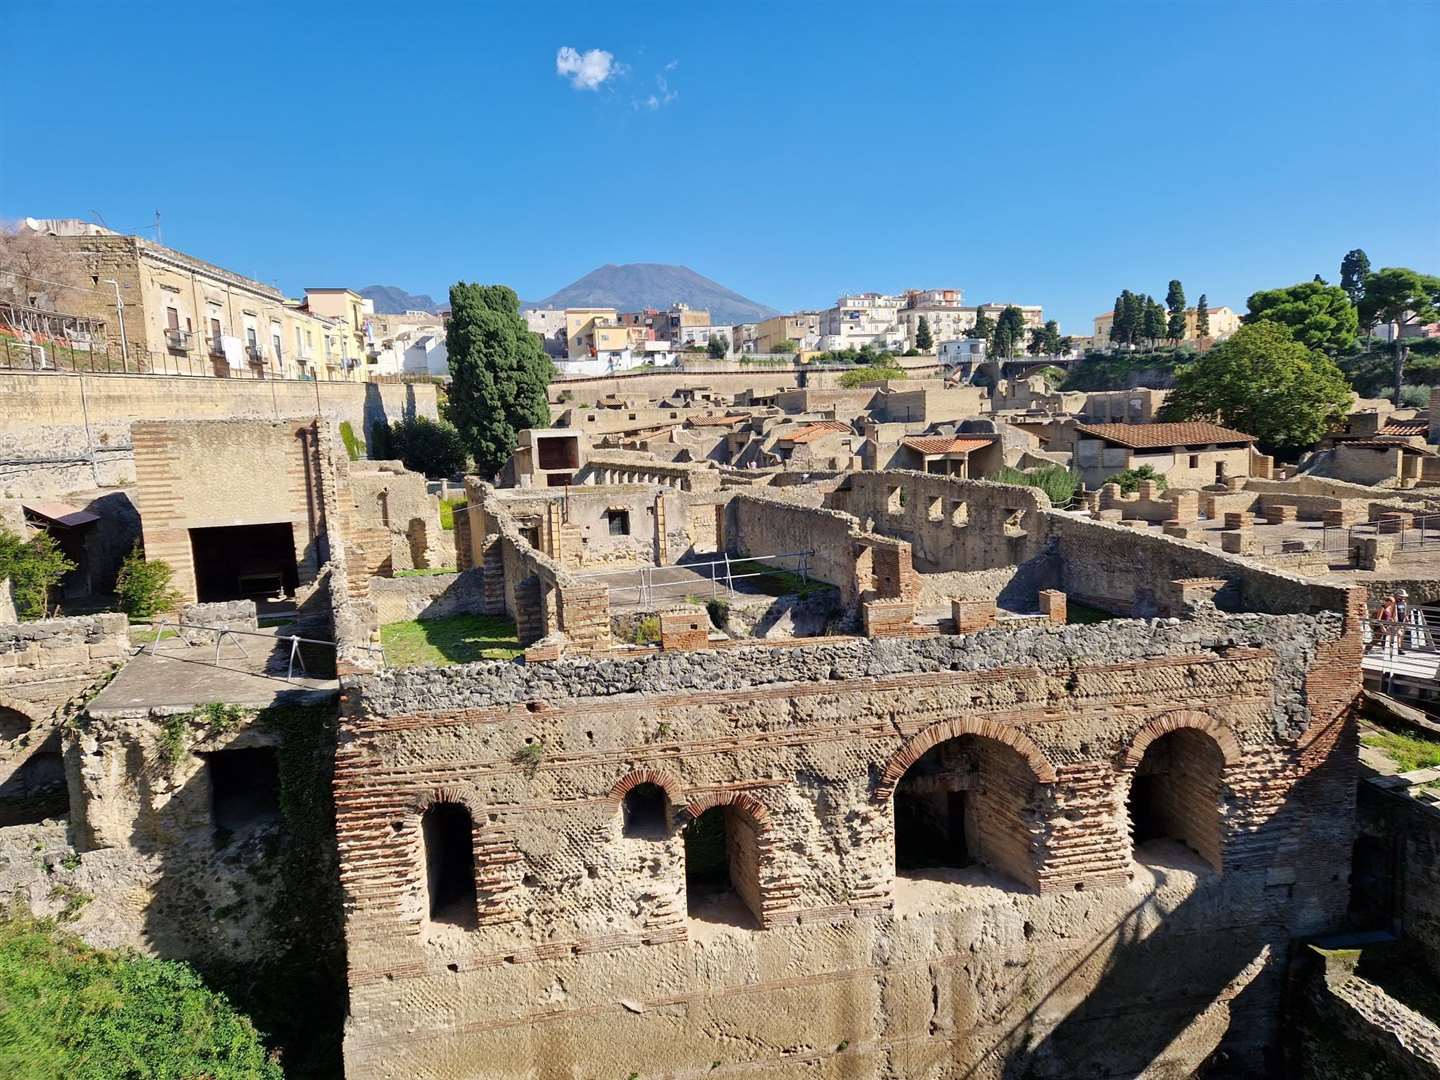 The town on Herculaneum - consumed in AD79 when Vesuvius (which looms in the background) erupted